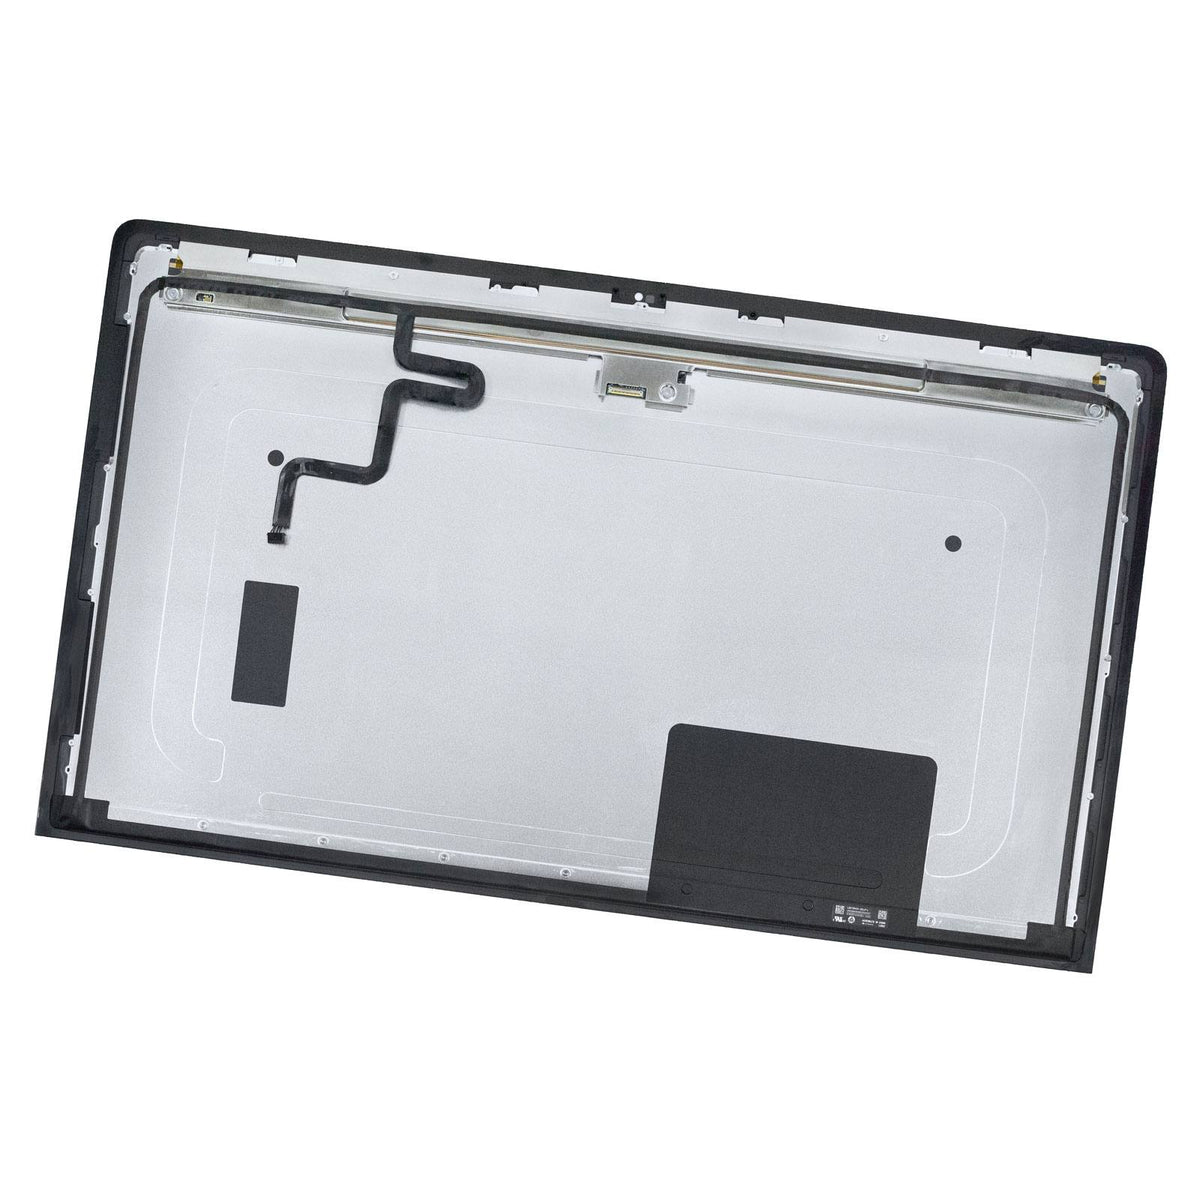 LCD DISPLAY PANEL + GLASS COVER (27") FOR IMAC 27" A1419 (LATE 2012,LATE 2013)